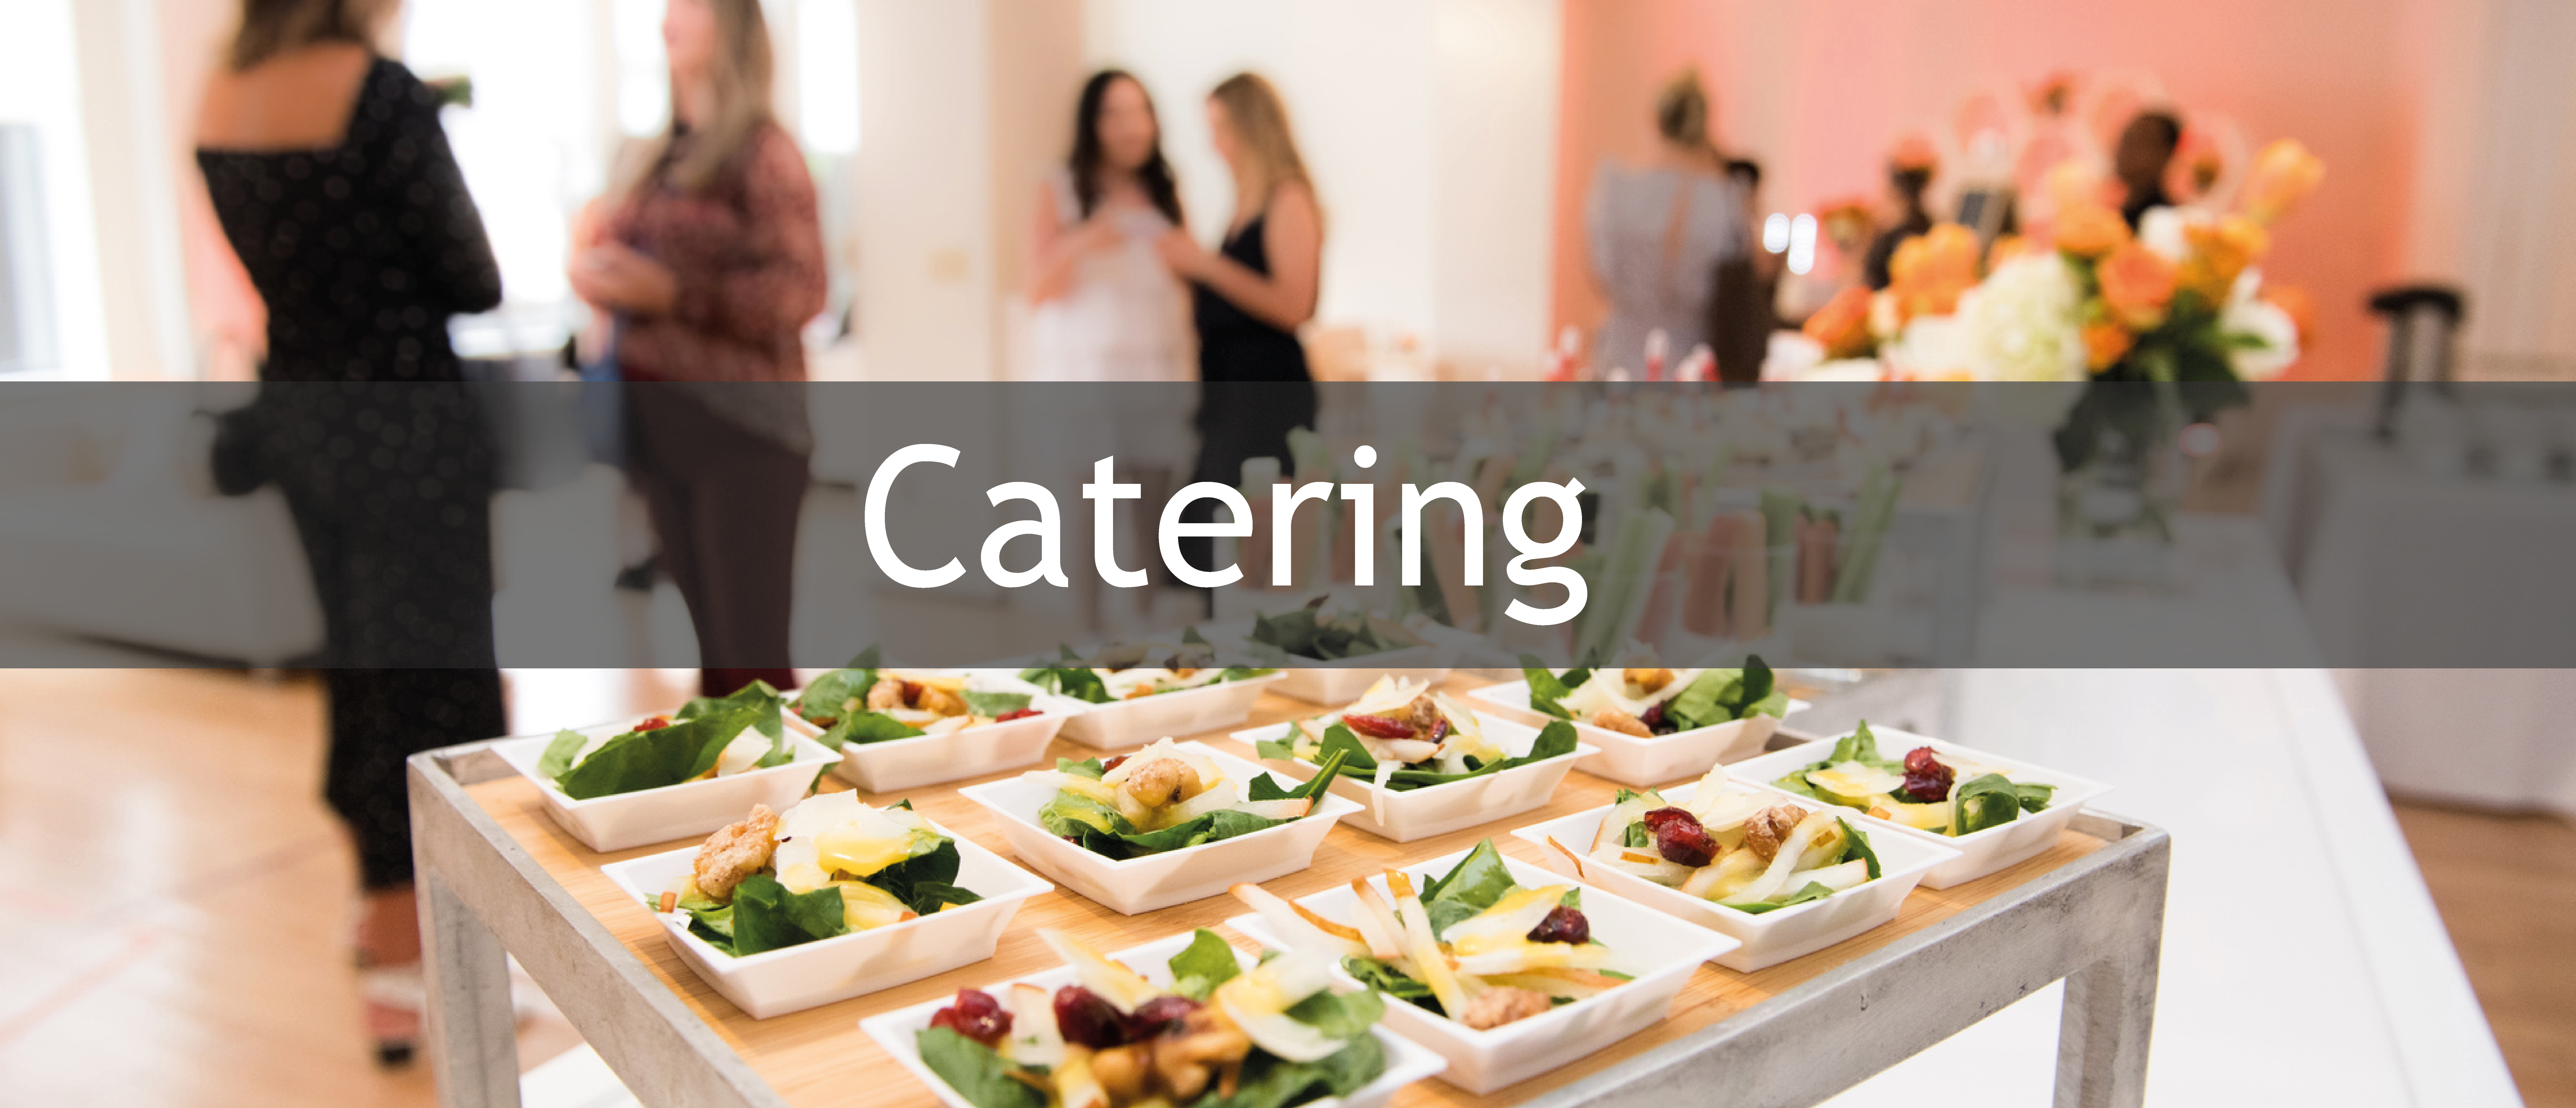 Catering - Communication & Events